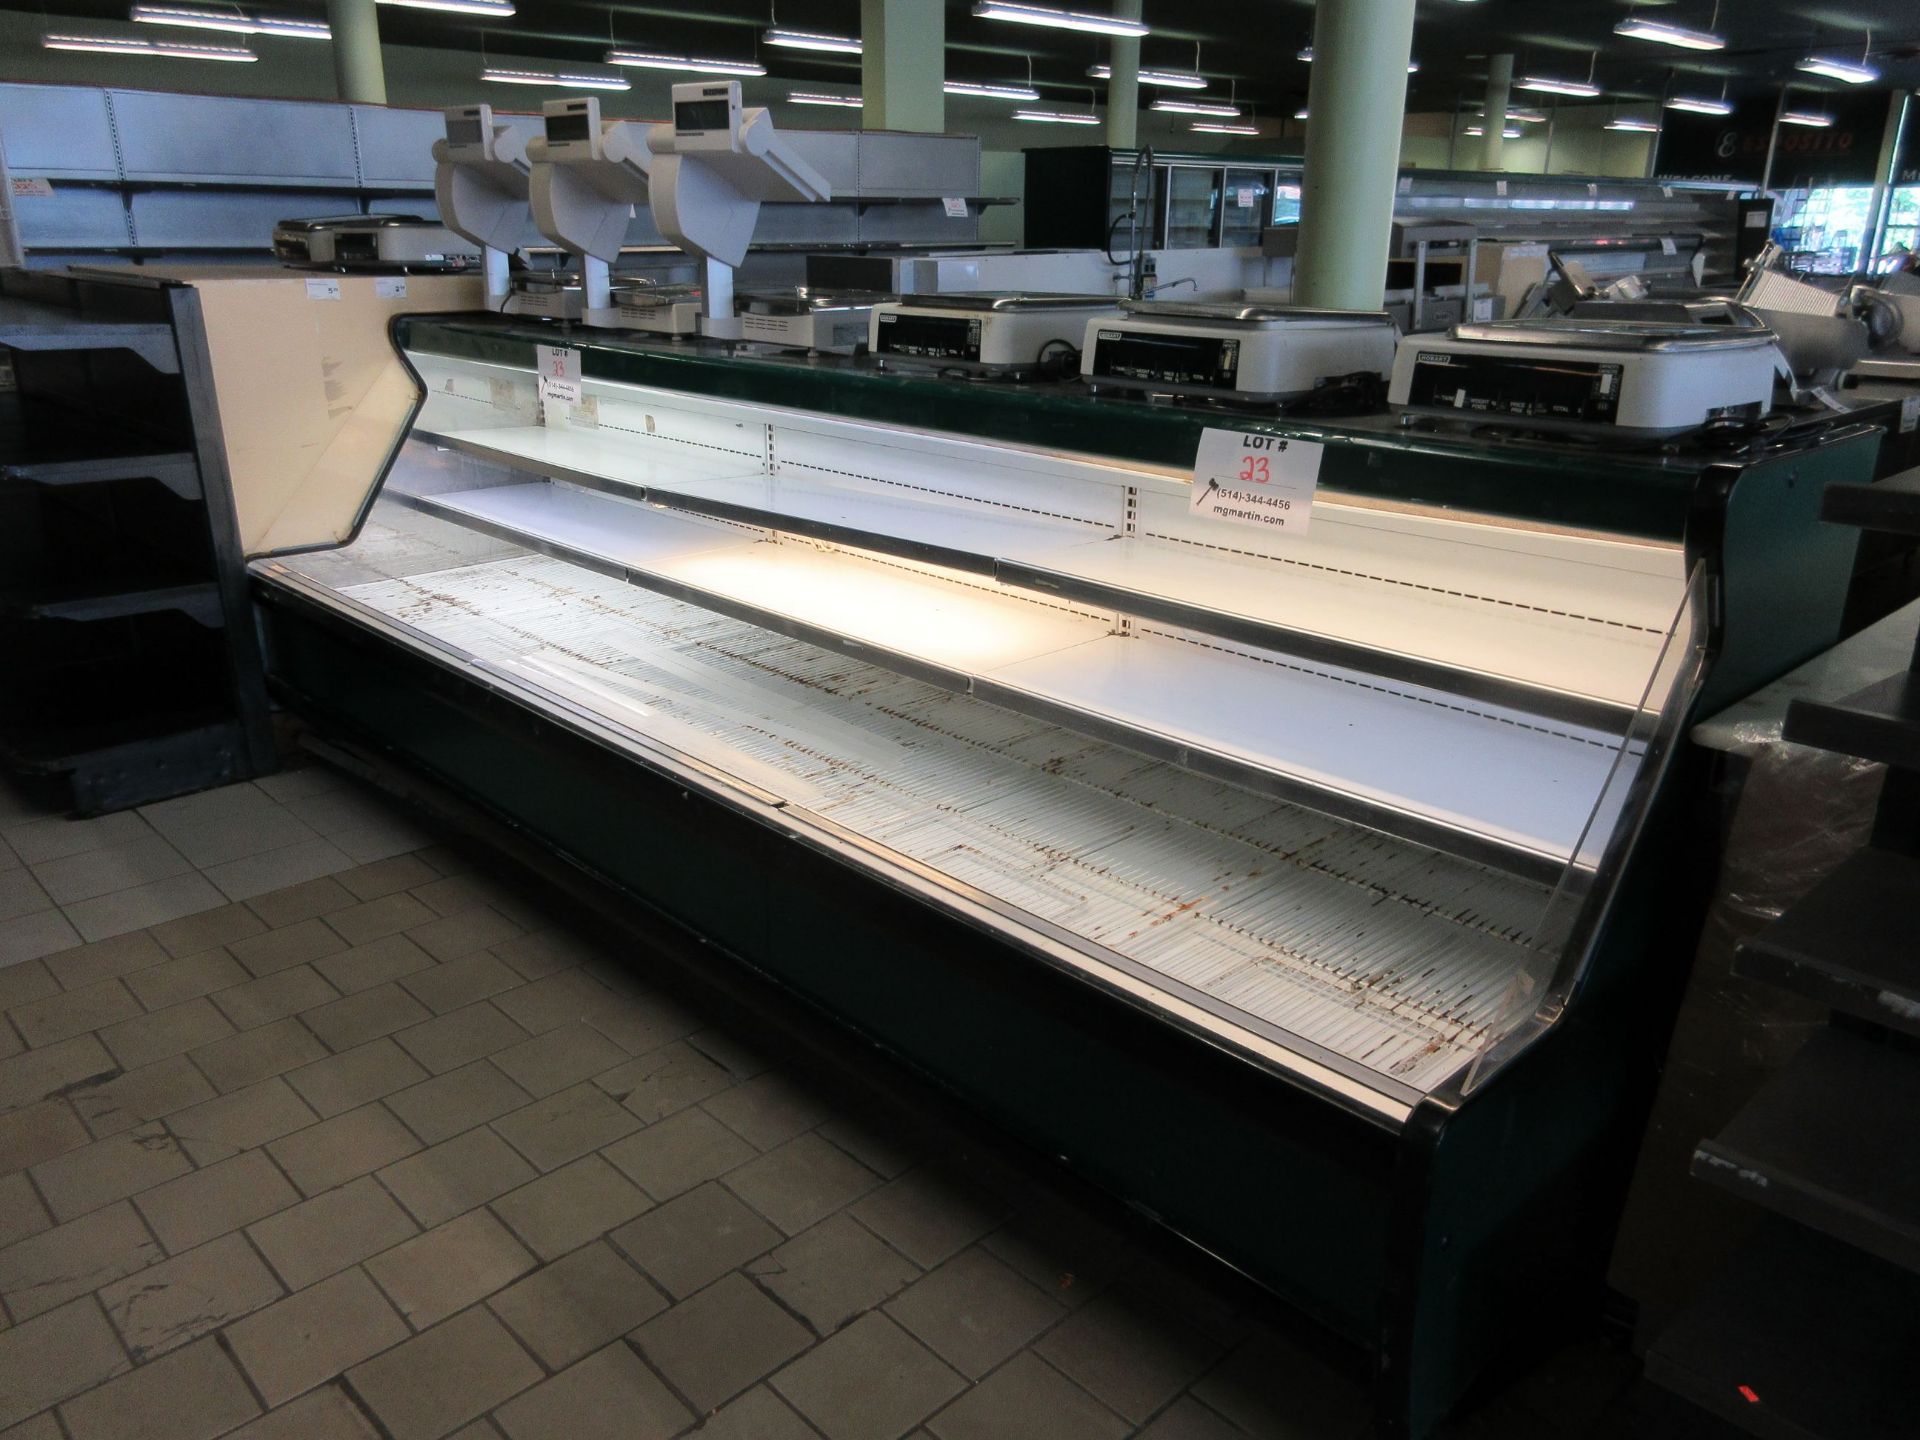 Open refrigerated unit without compressor 12 1/4 ft w x 43" d x 50" h